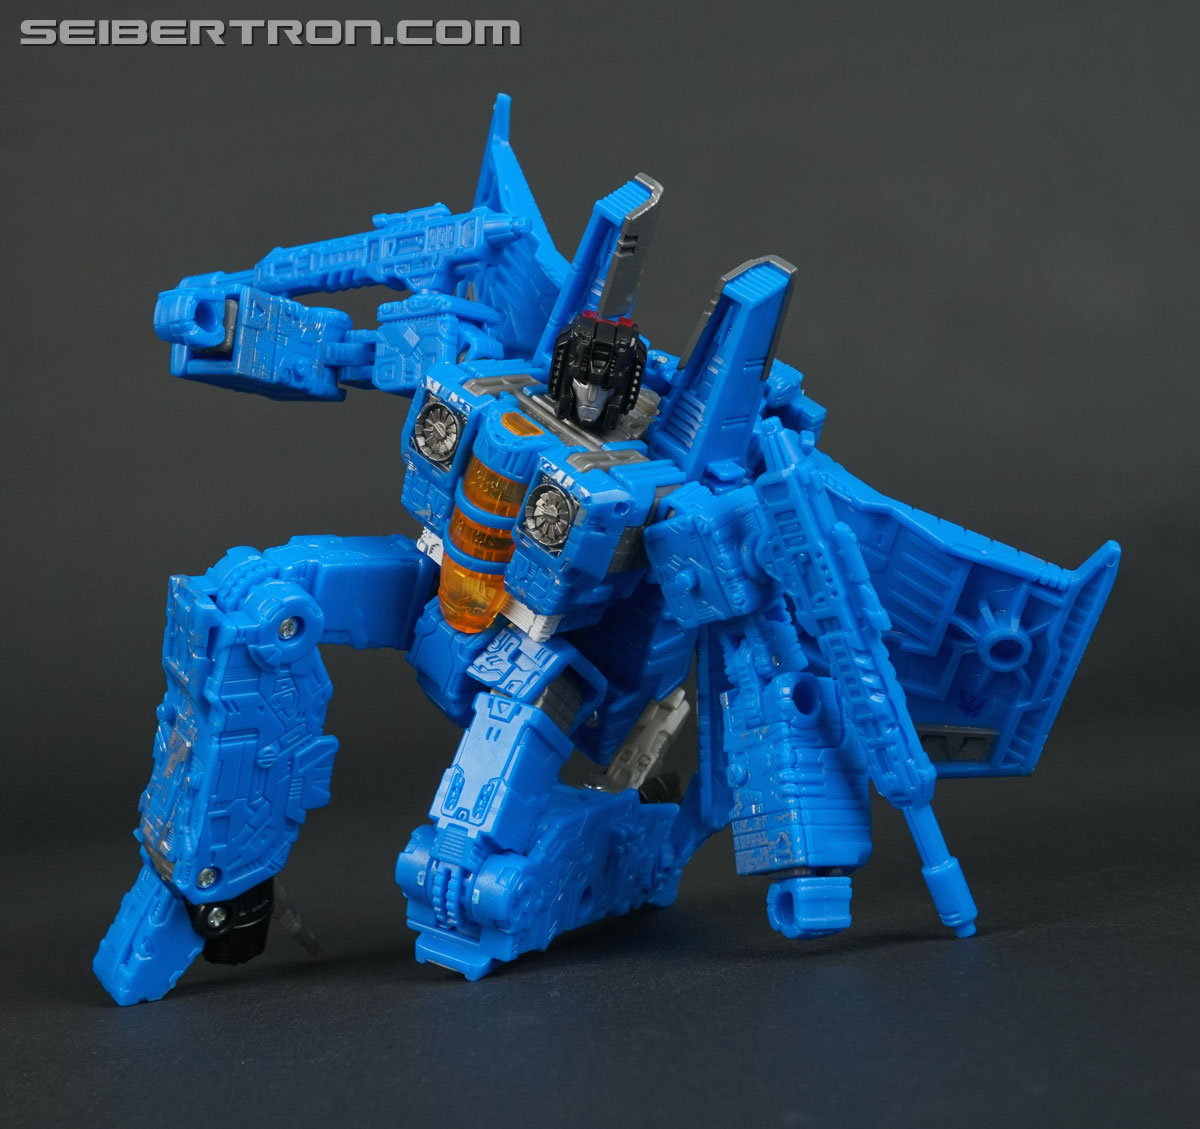 Transformers War for Cybertron: SIEGE Ion Storm (Seeker Ion Storm) (Image #84 of 111)